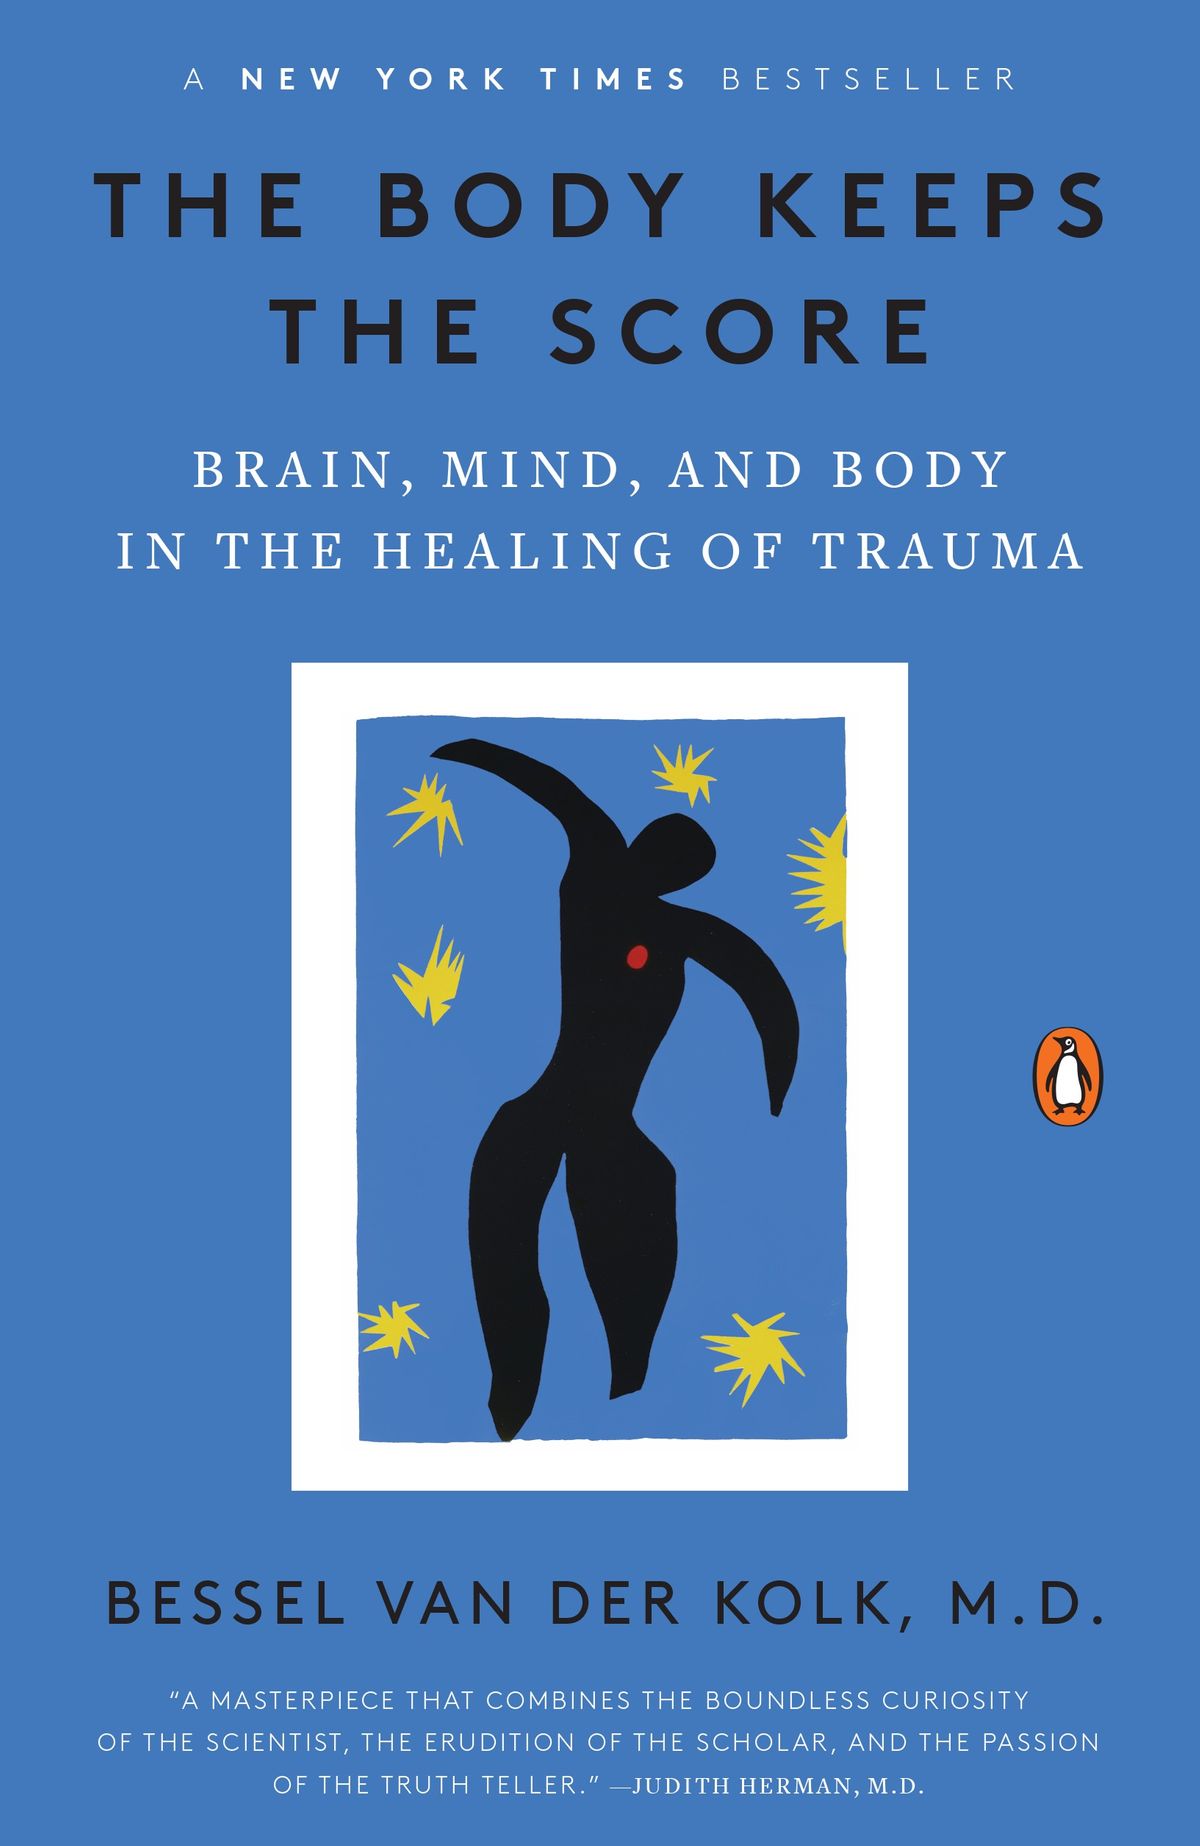 The Body Keeps the Score:  Brain, Mind and Body in the Healing of Trauma by Bessel Van Der Kolk, MD